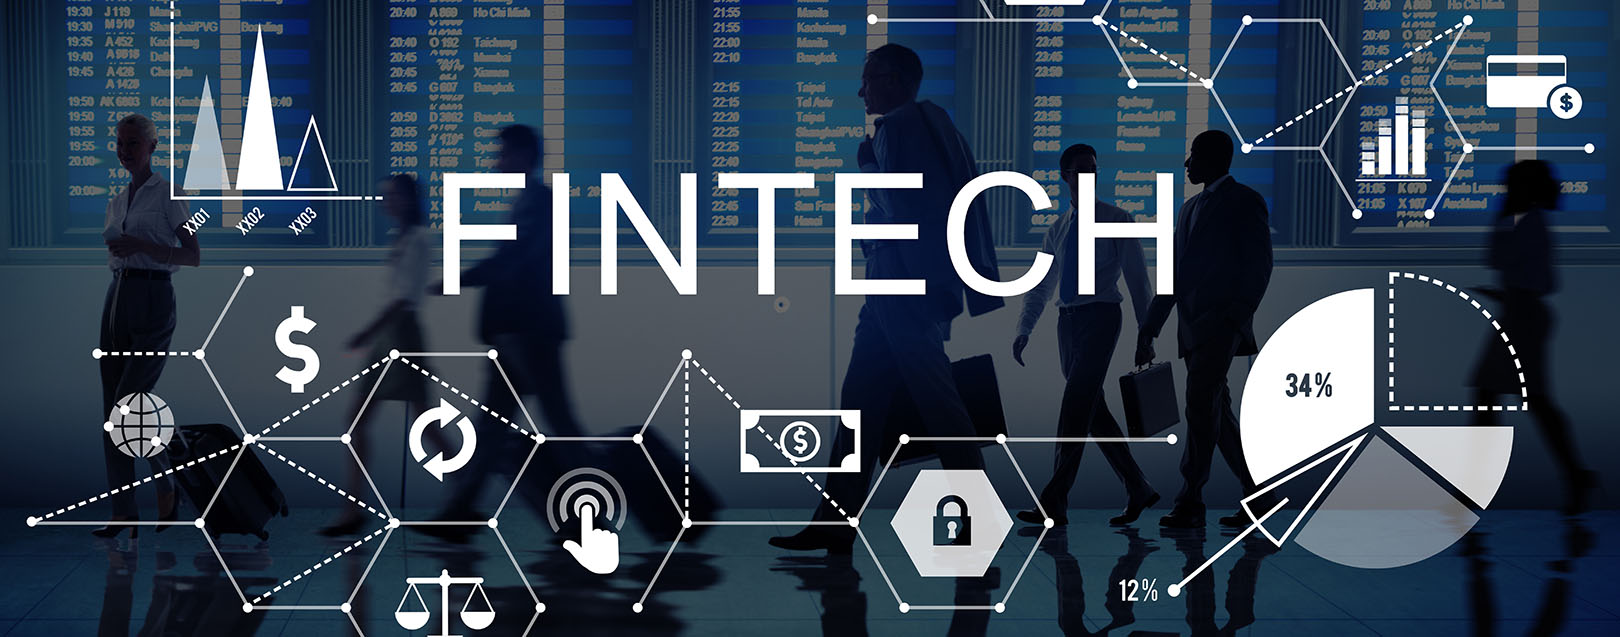 Investments in Indian Fintech reach $339 million